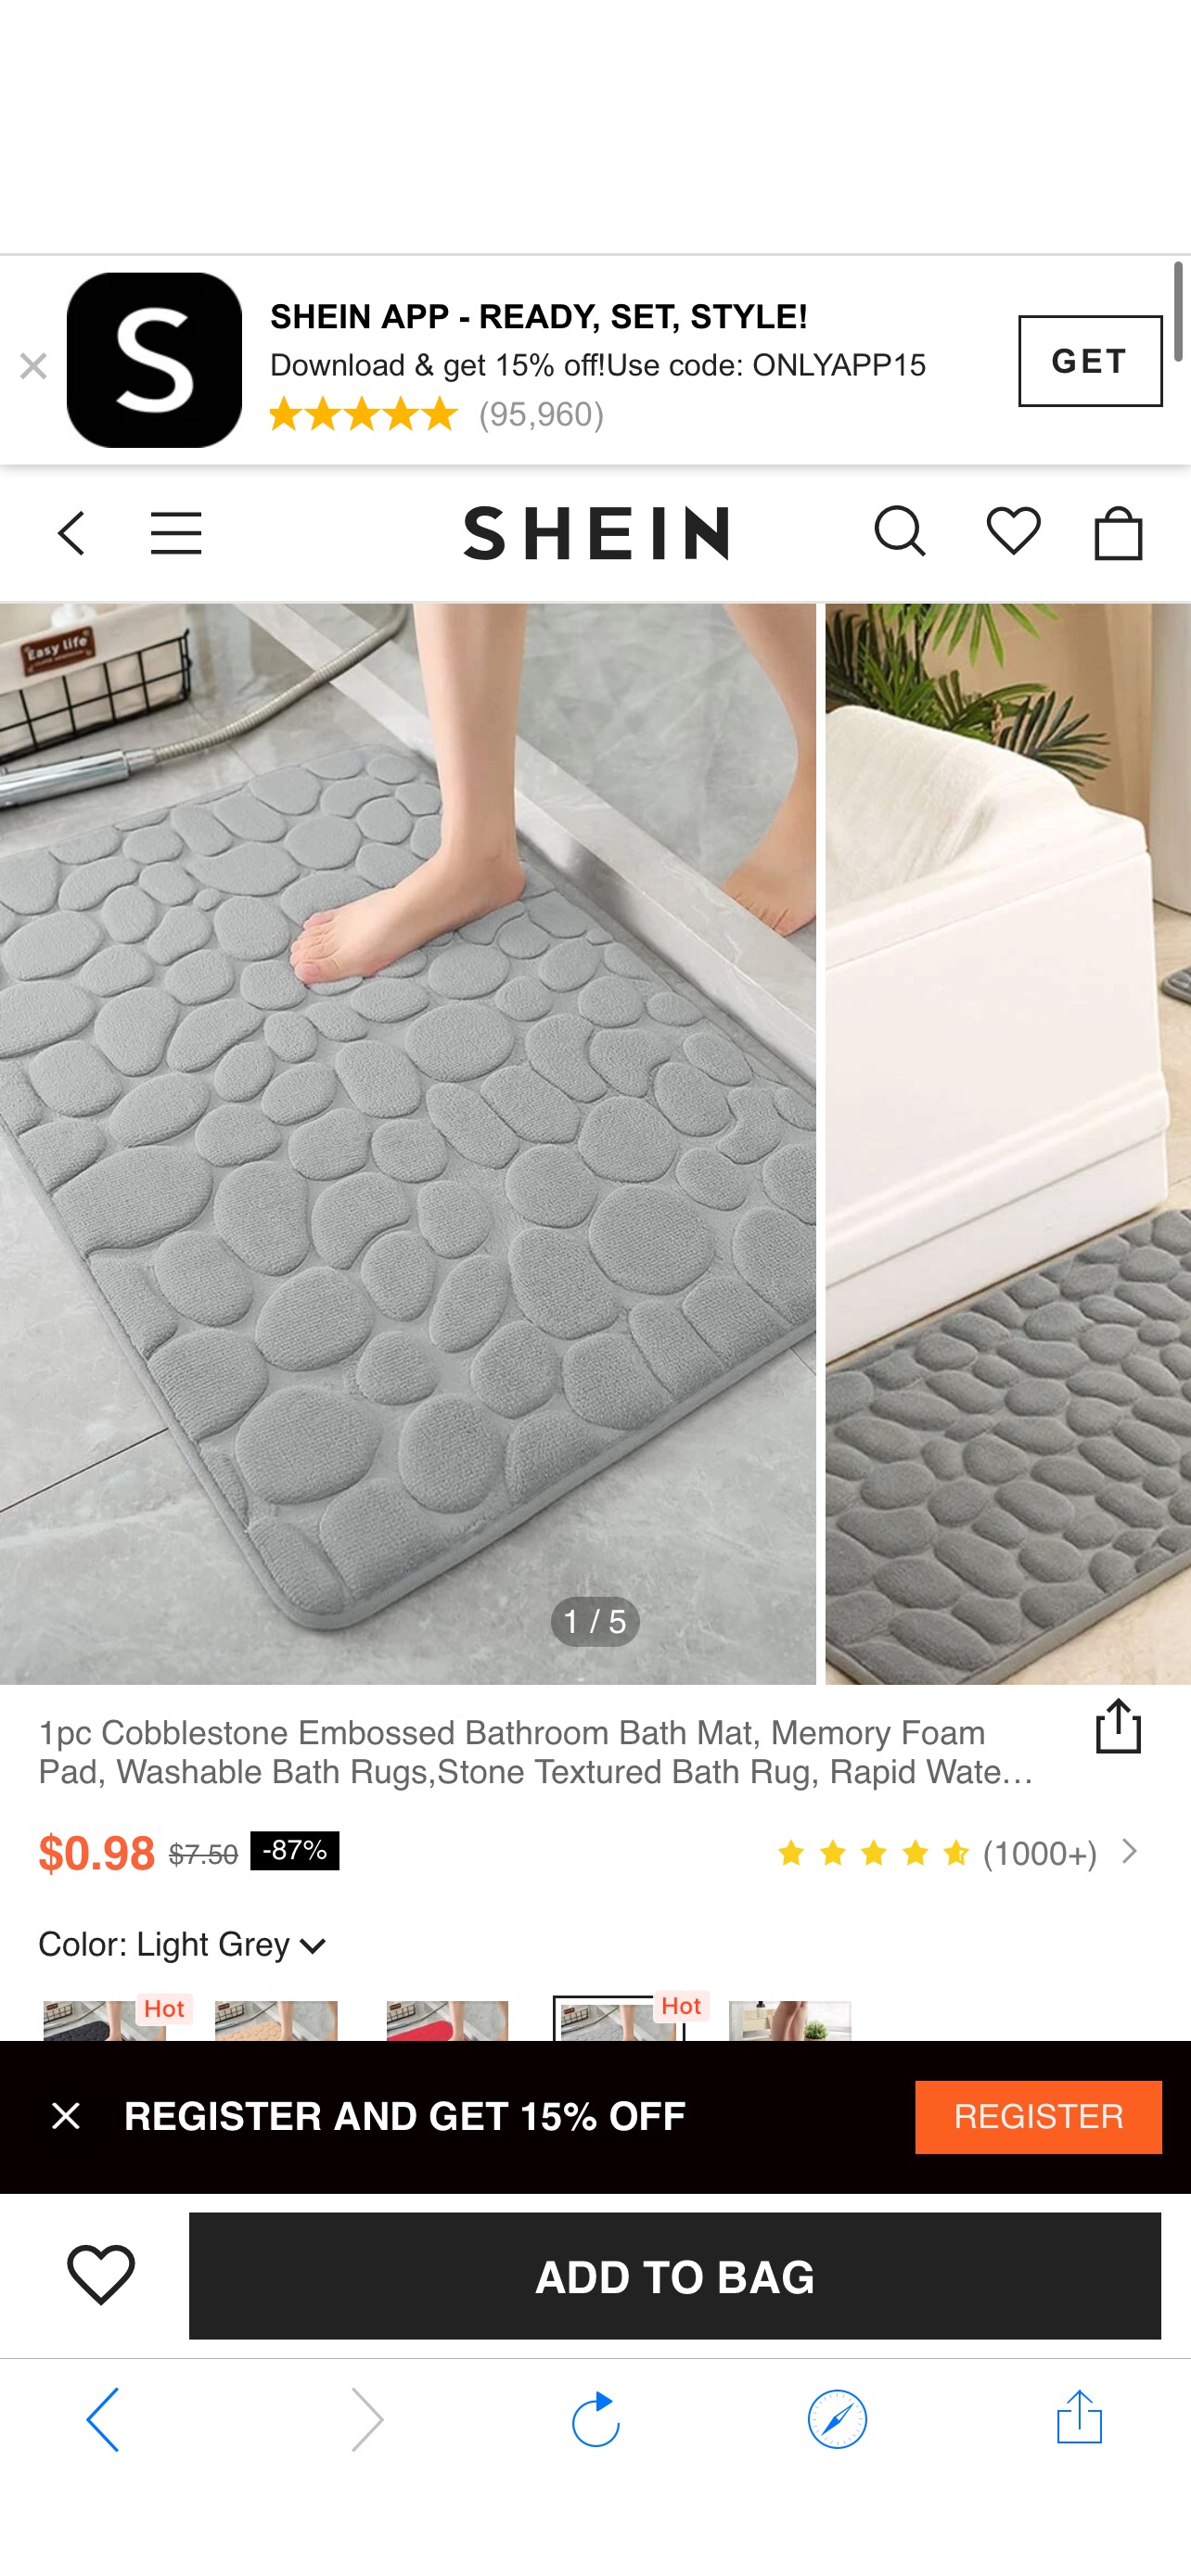 1pc Cobblestone Embossed Bathroom Bath Mat, Memory Foam Pad, Washable Bath Rugs,Stone Textured Bath Rug, Rapid Water Absorbent, Non-Slip, Washable, Thick, Soft And Comfortable Carpet For Shower Room